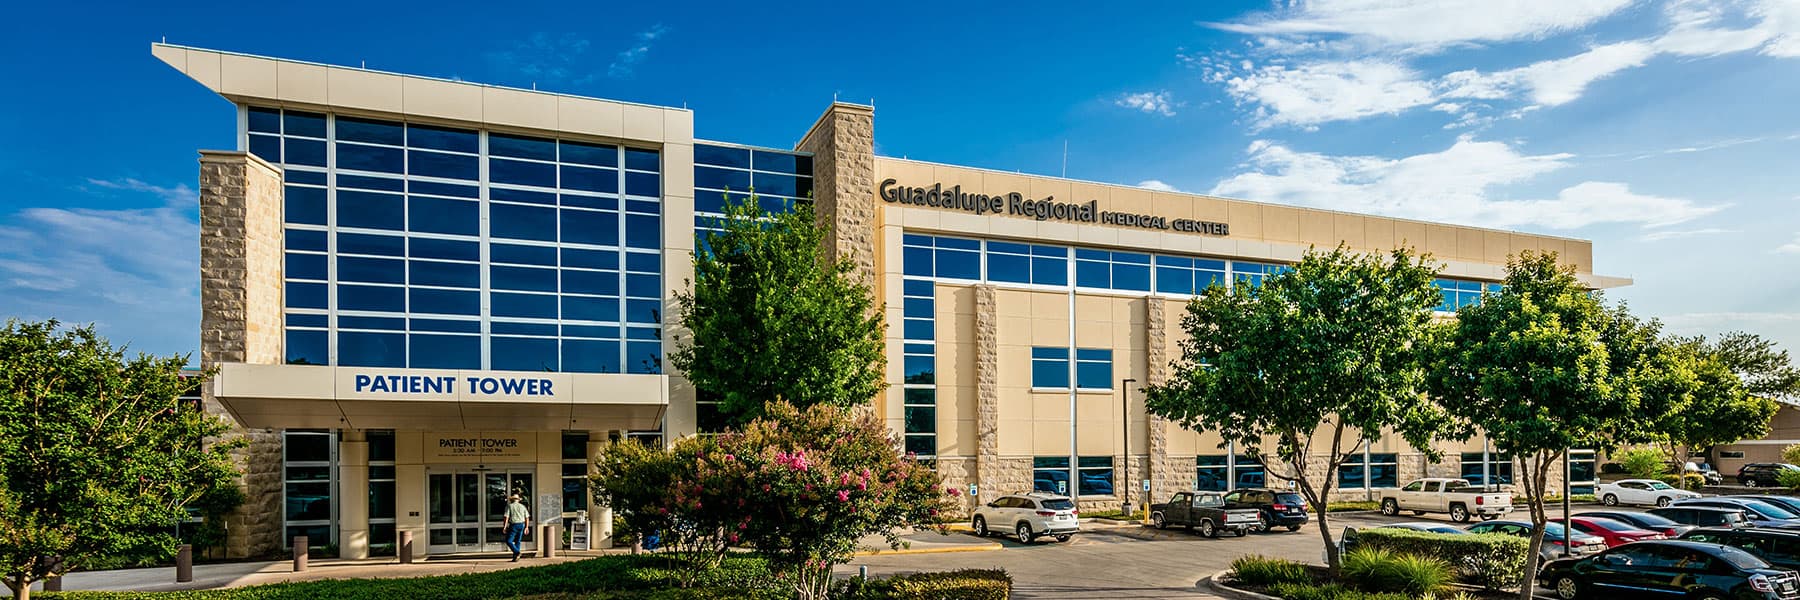 Protected: Guadalupe Regional Medical Center